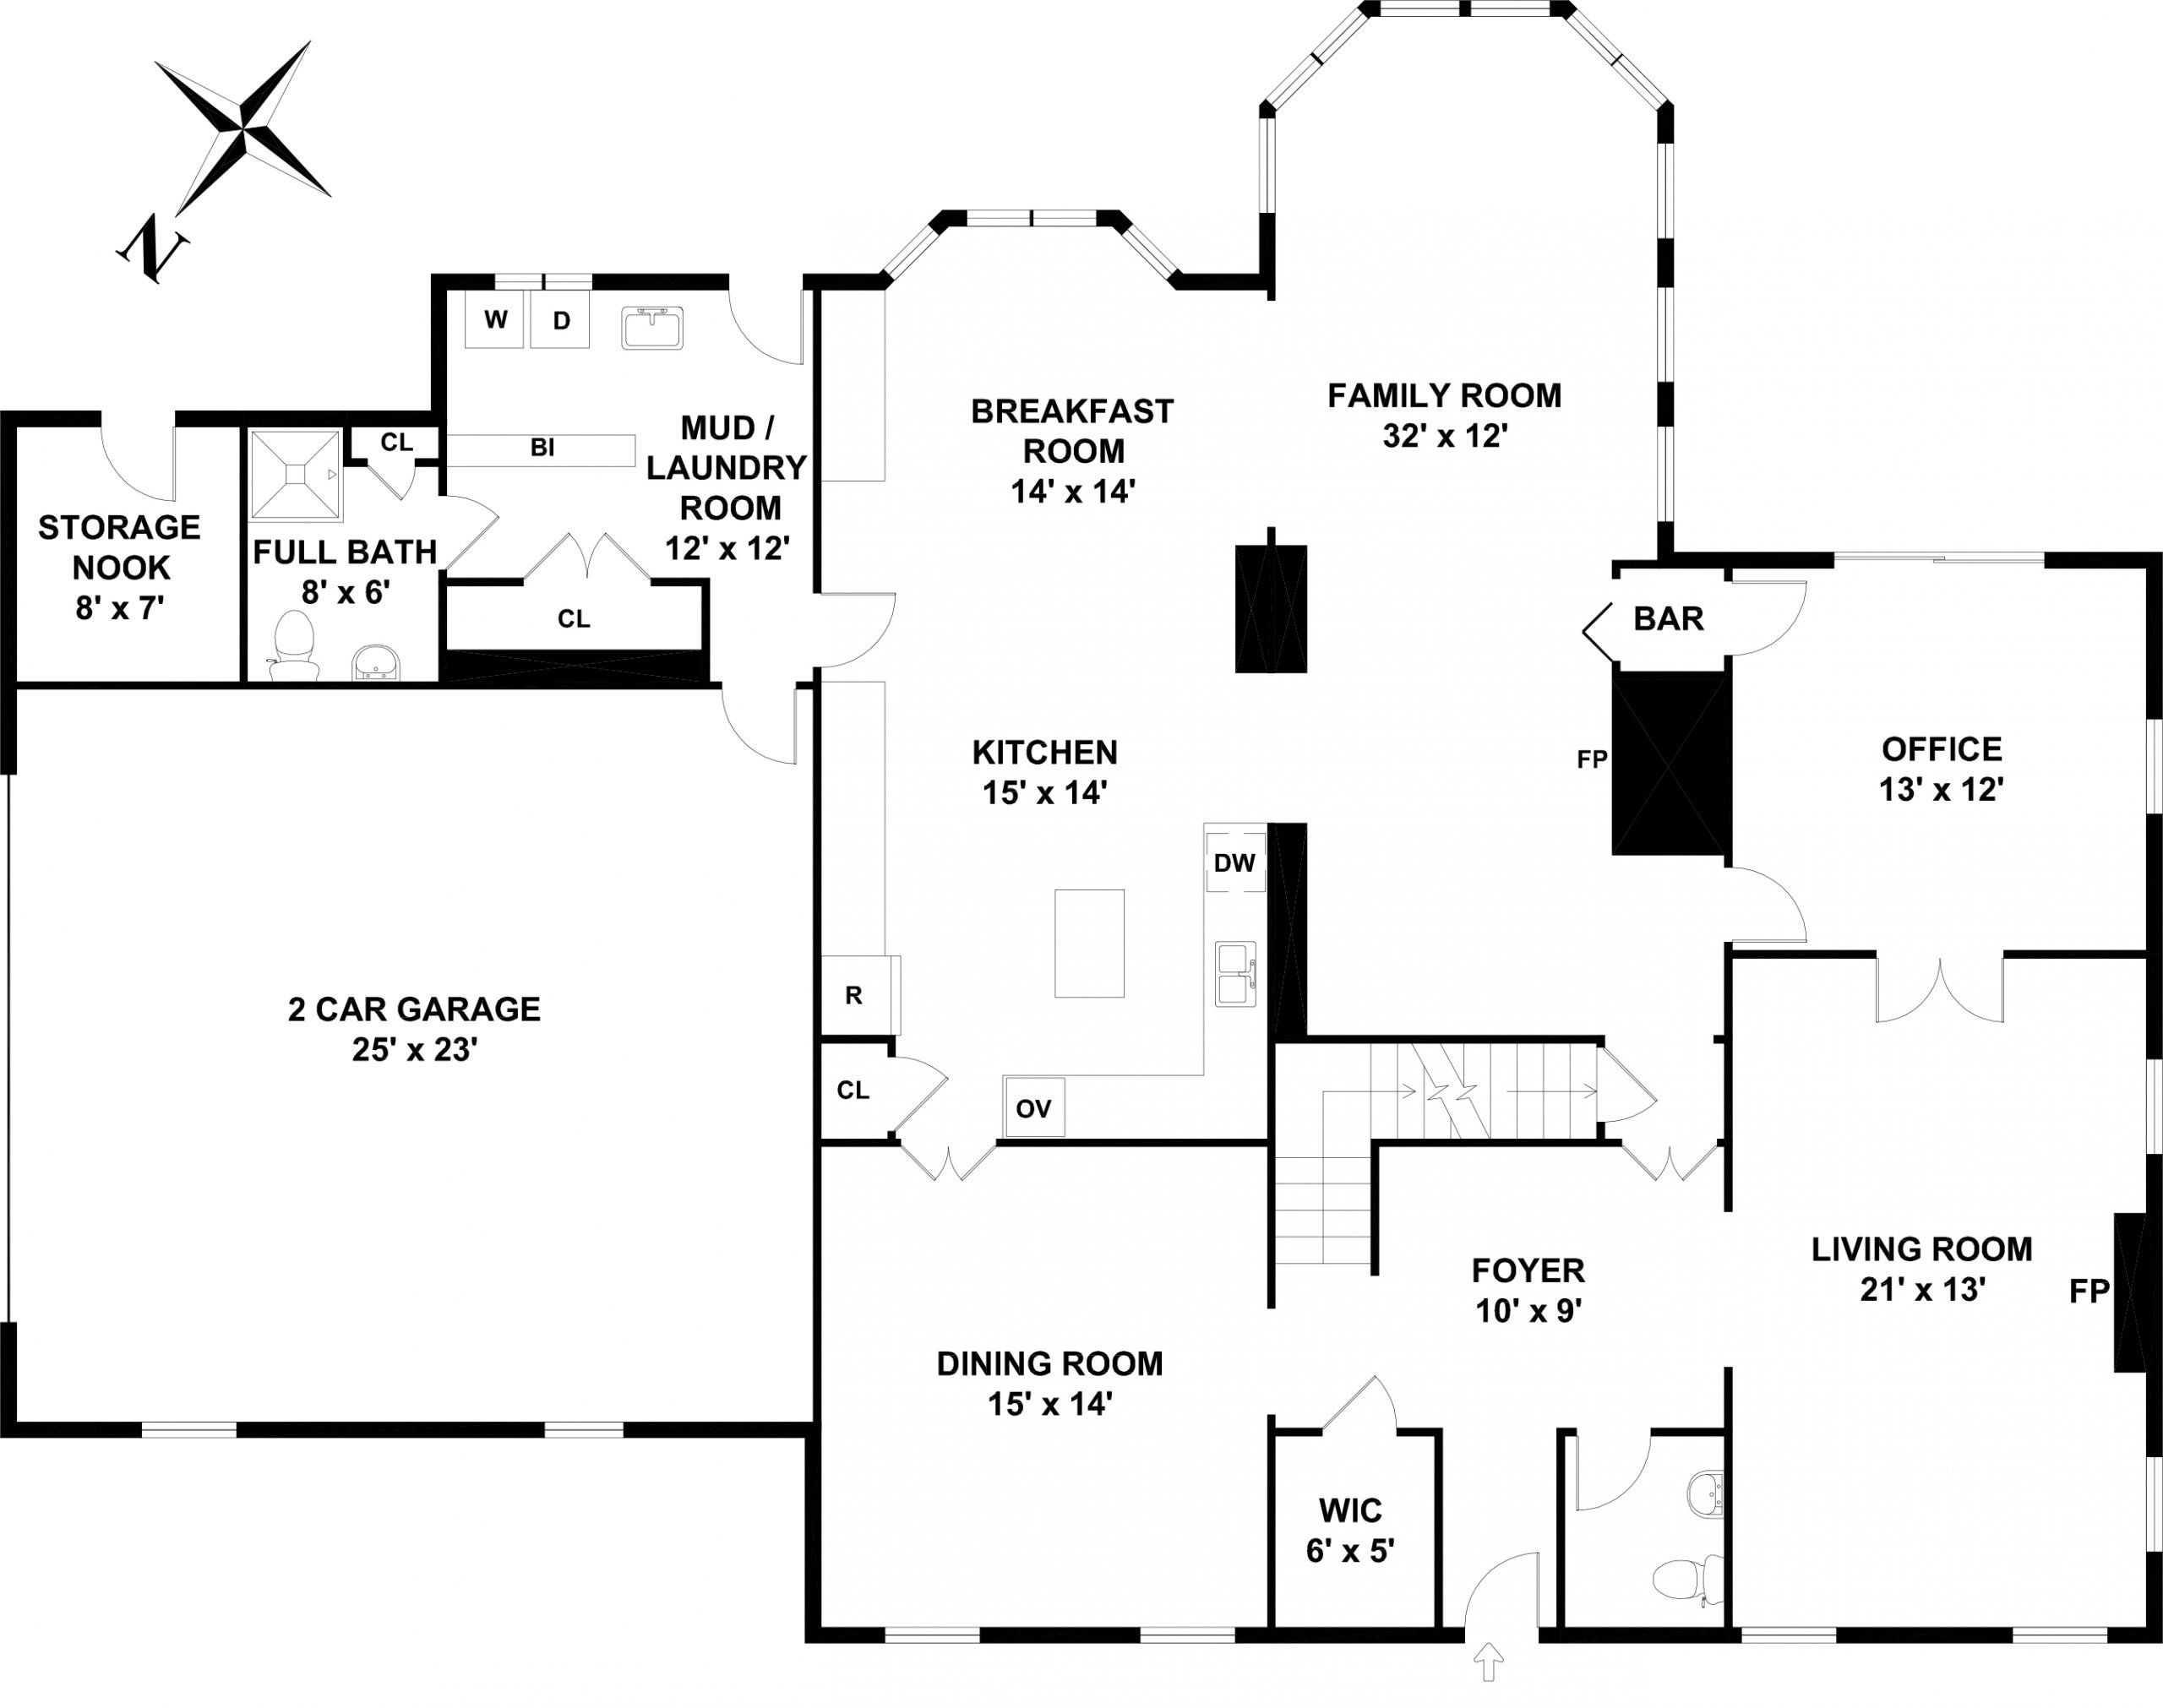 Floor plan of a building is shown in the picture